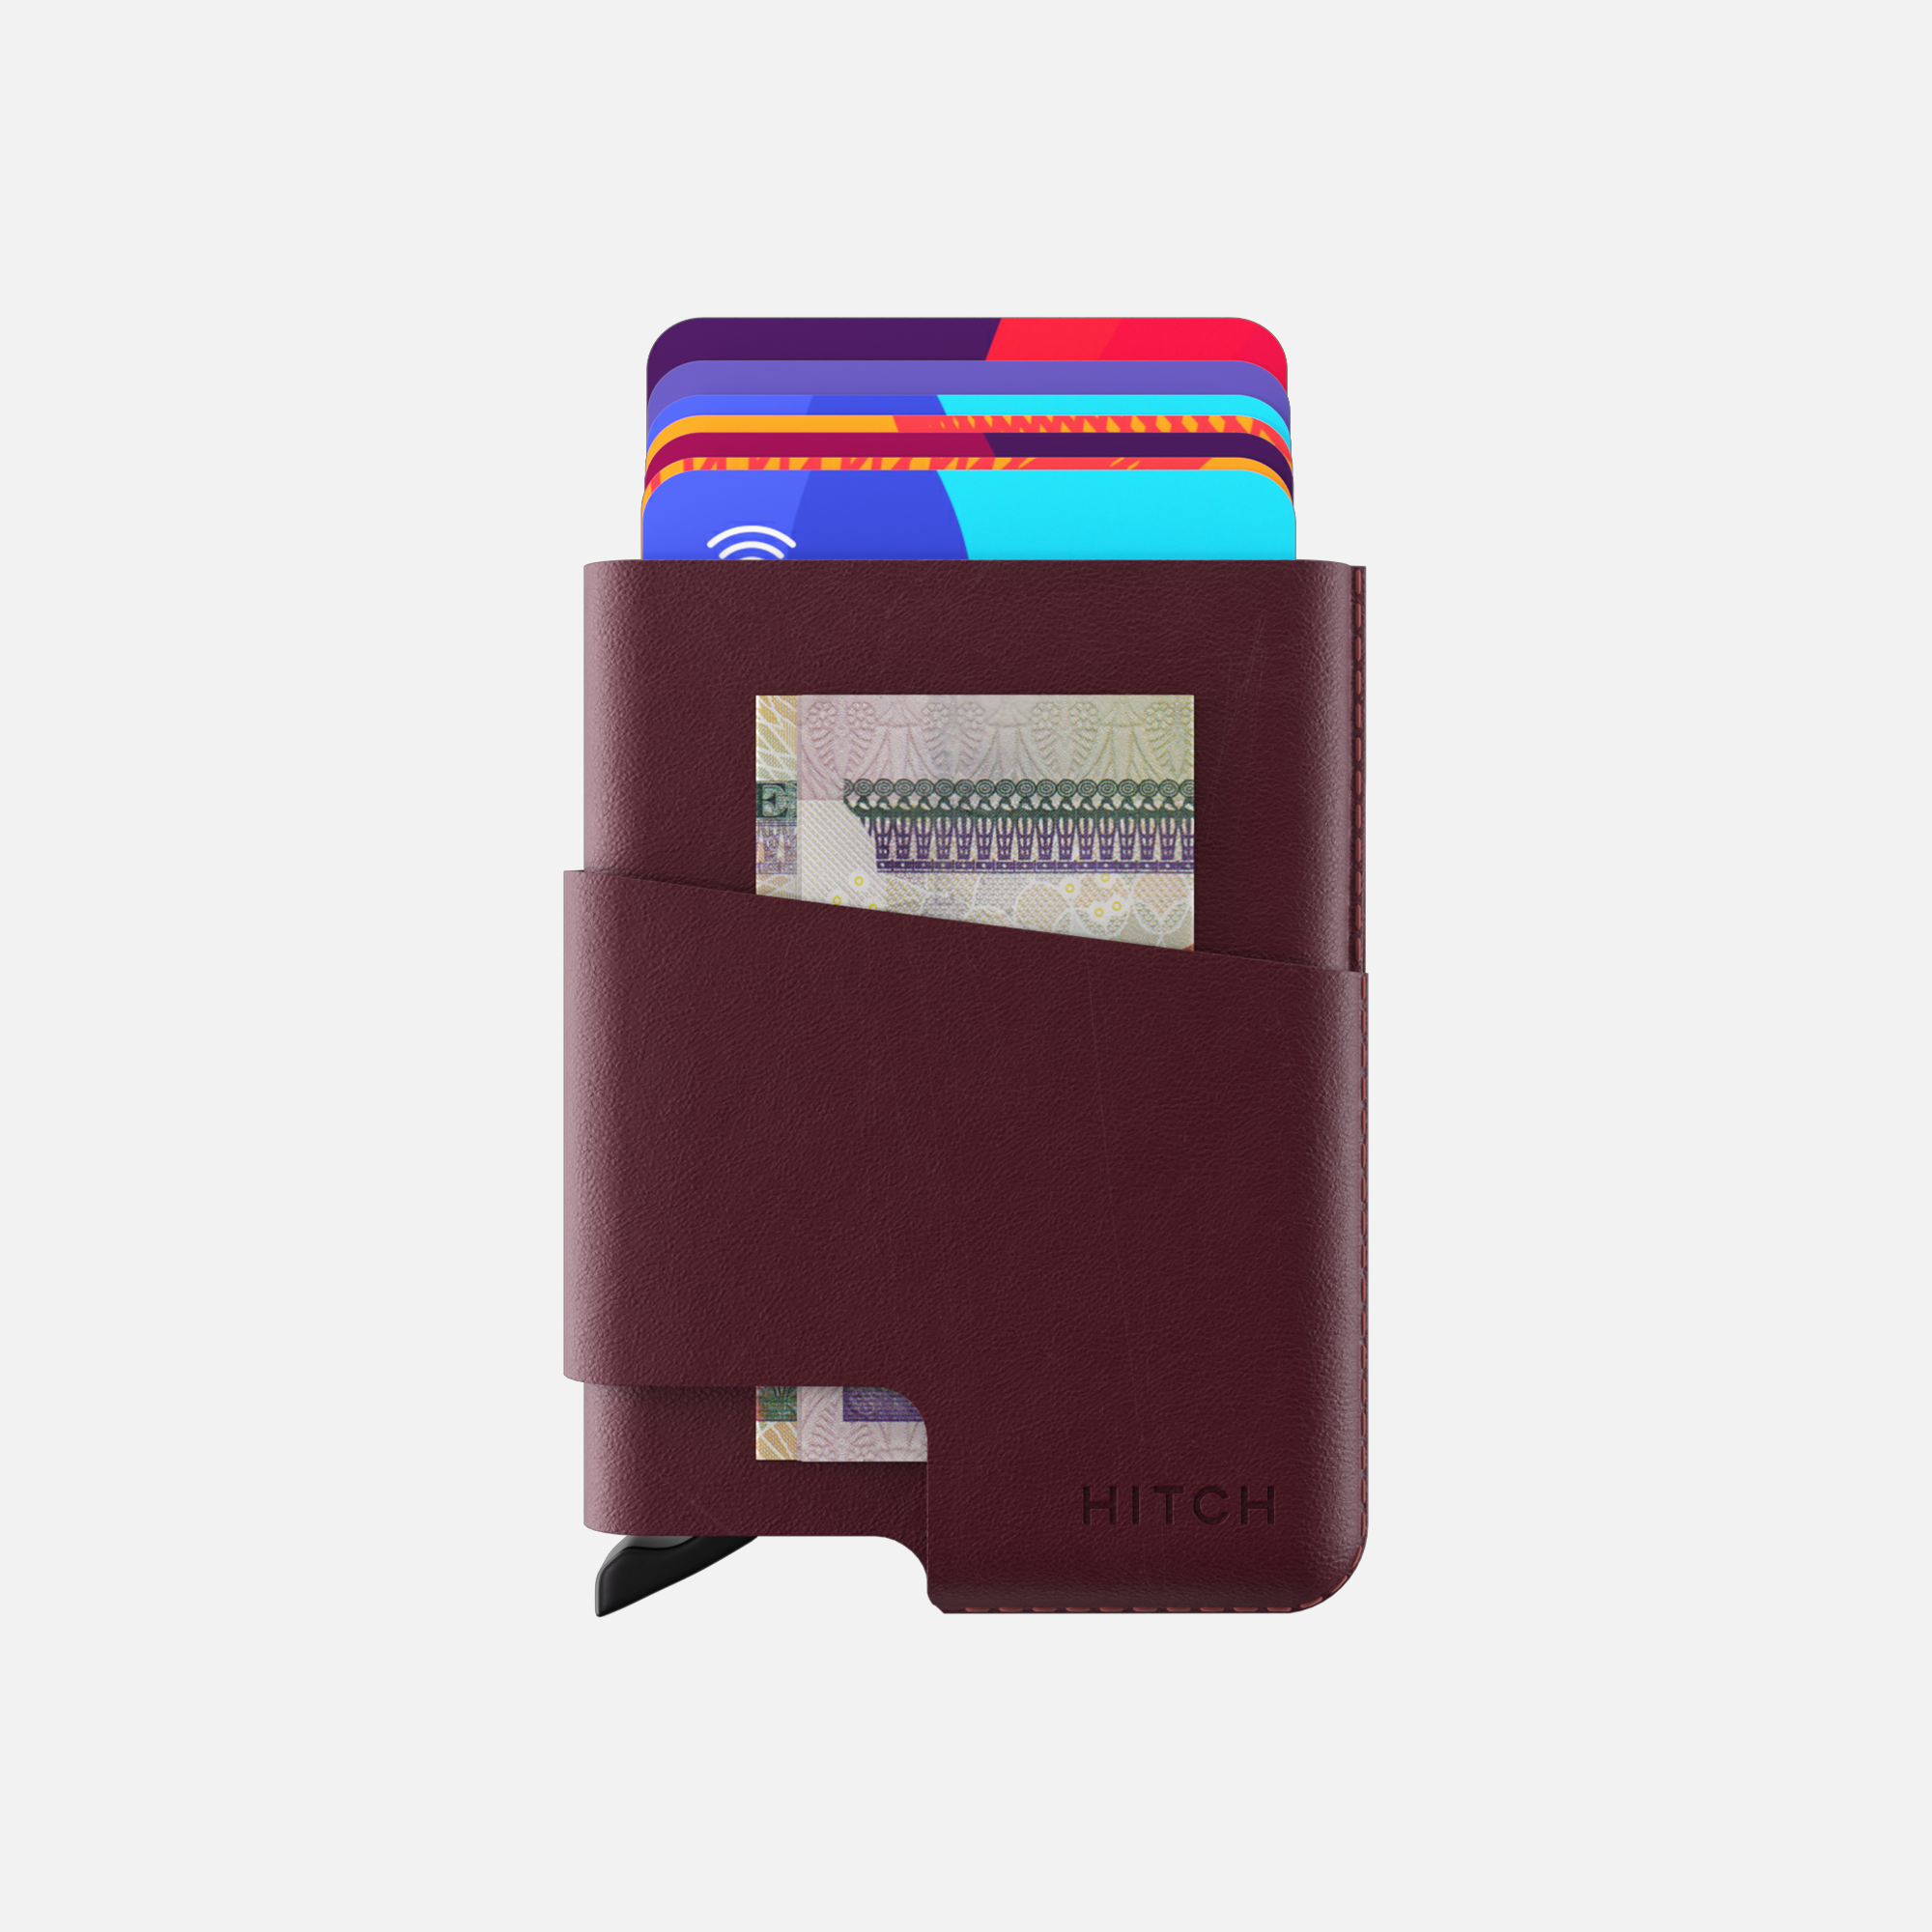 Burgundy leather cardholder wallet with multiple cards and cash slot, isolated on a white background.